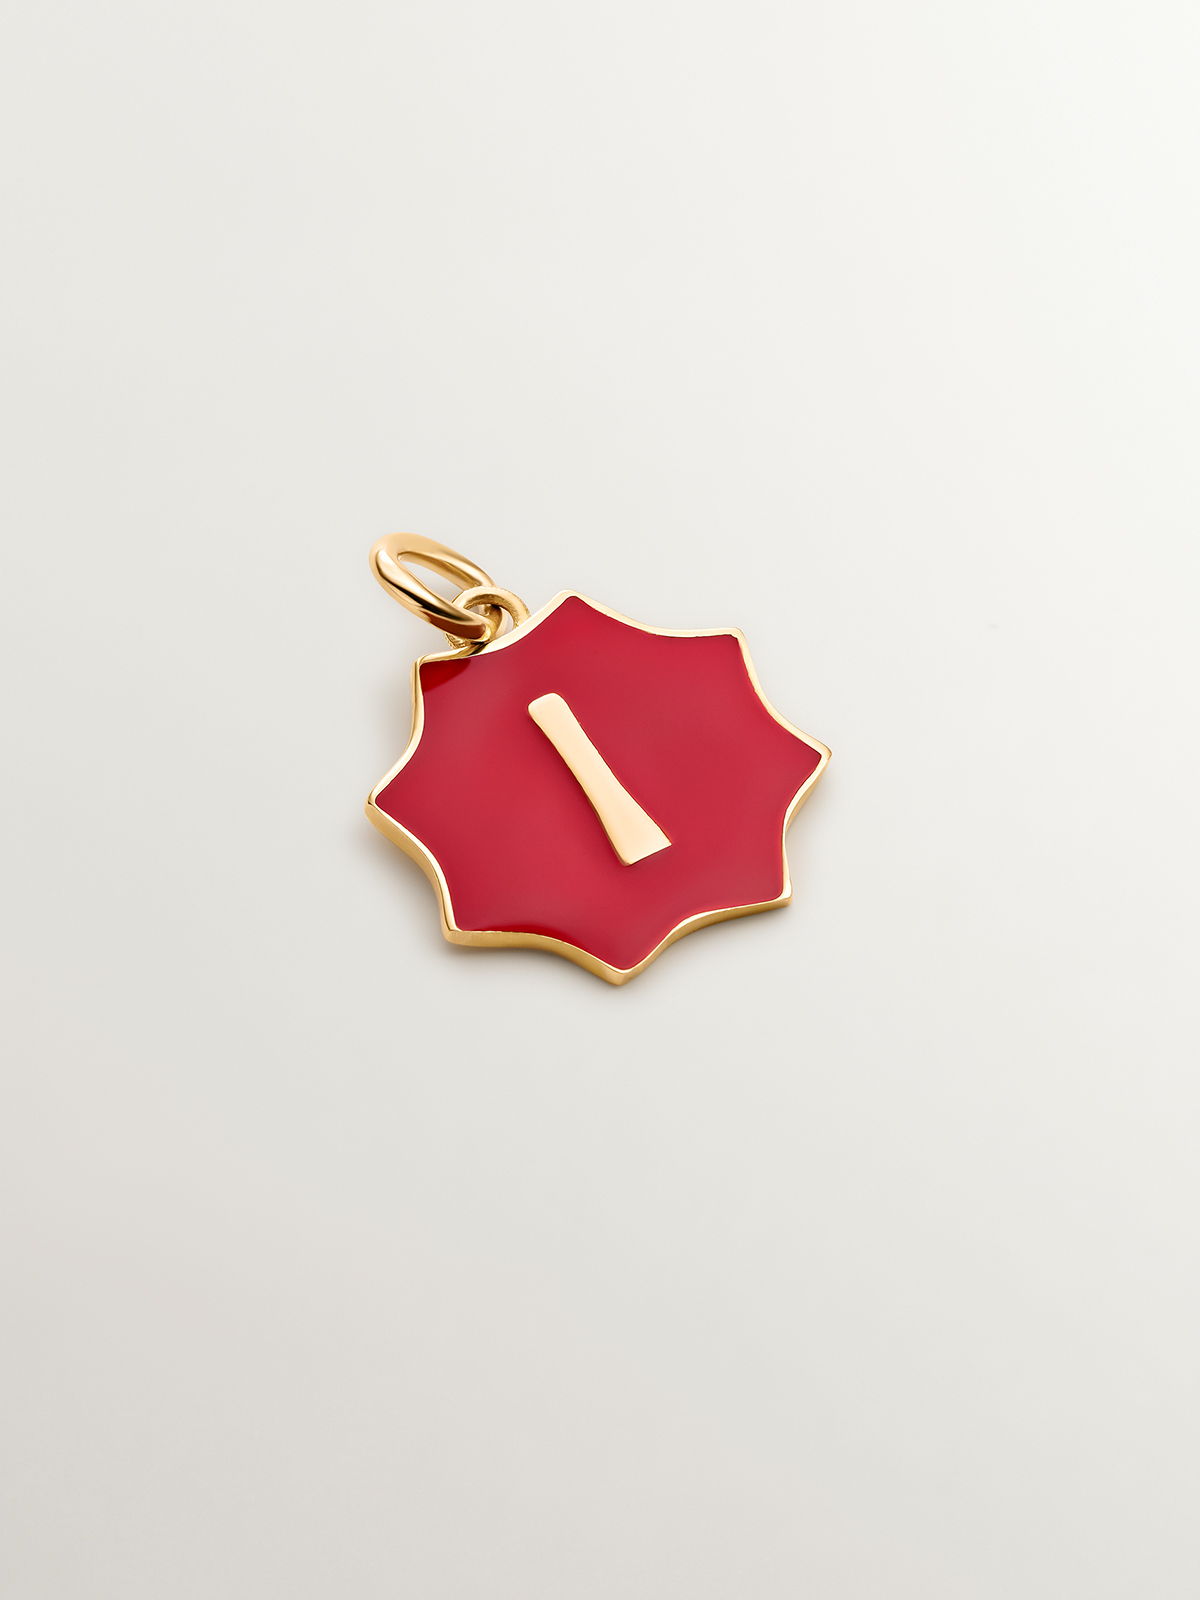 18K yellow gold plated 925 sterling silver charm with star-shaped red enamel and initial I